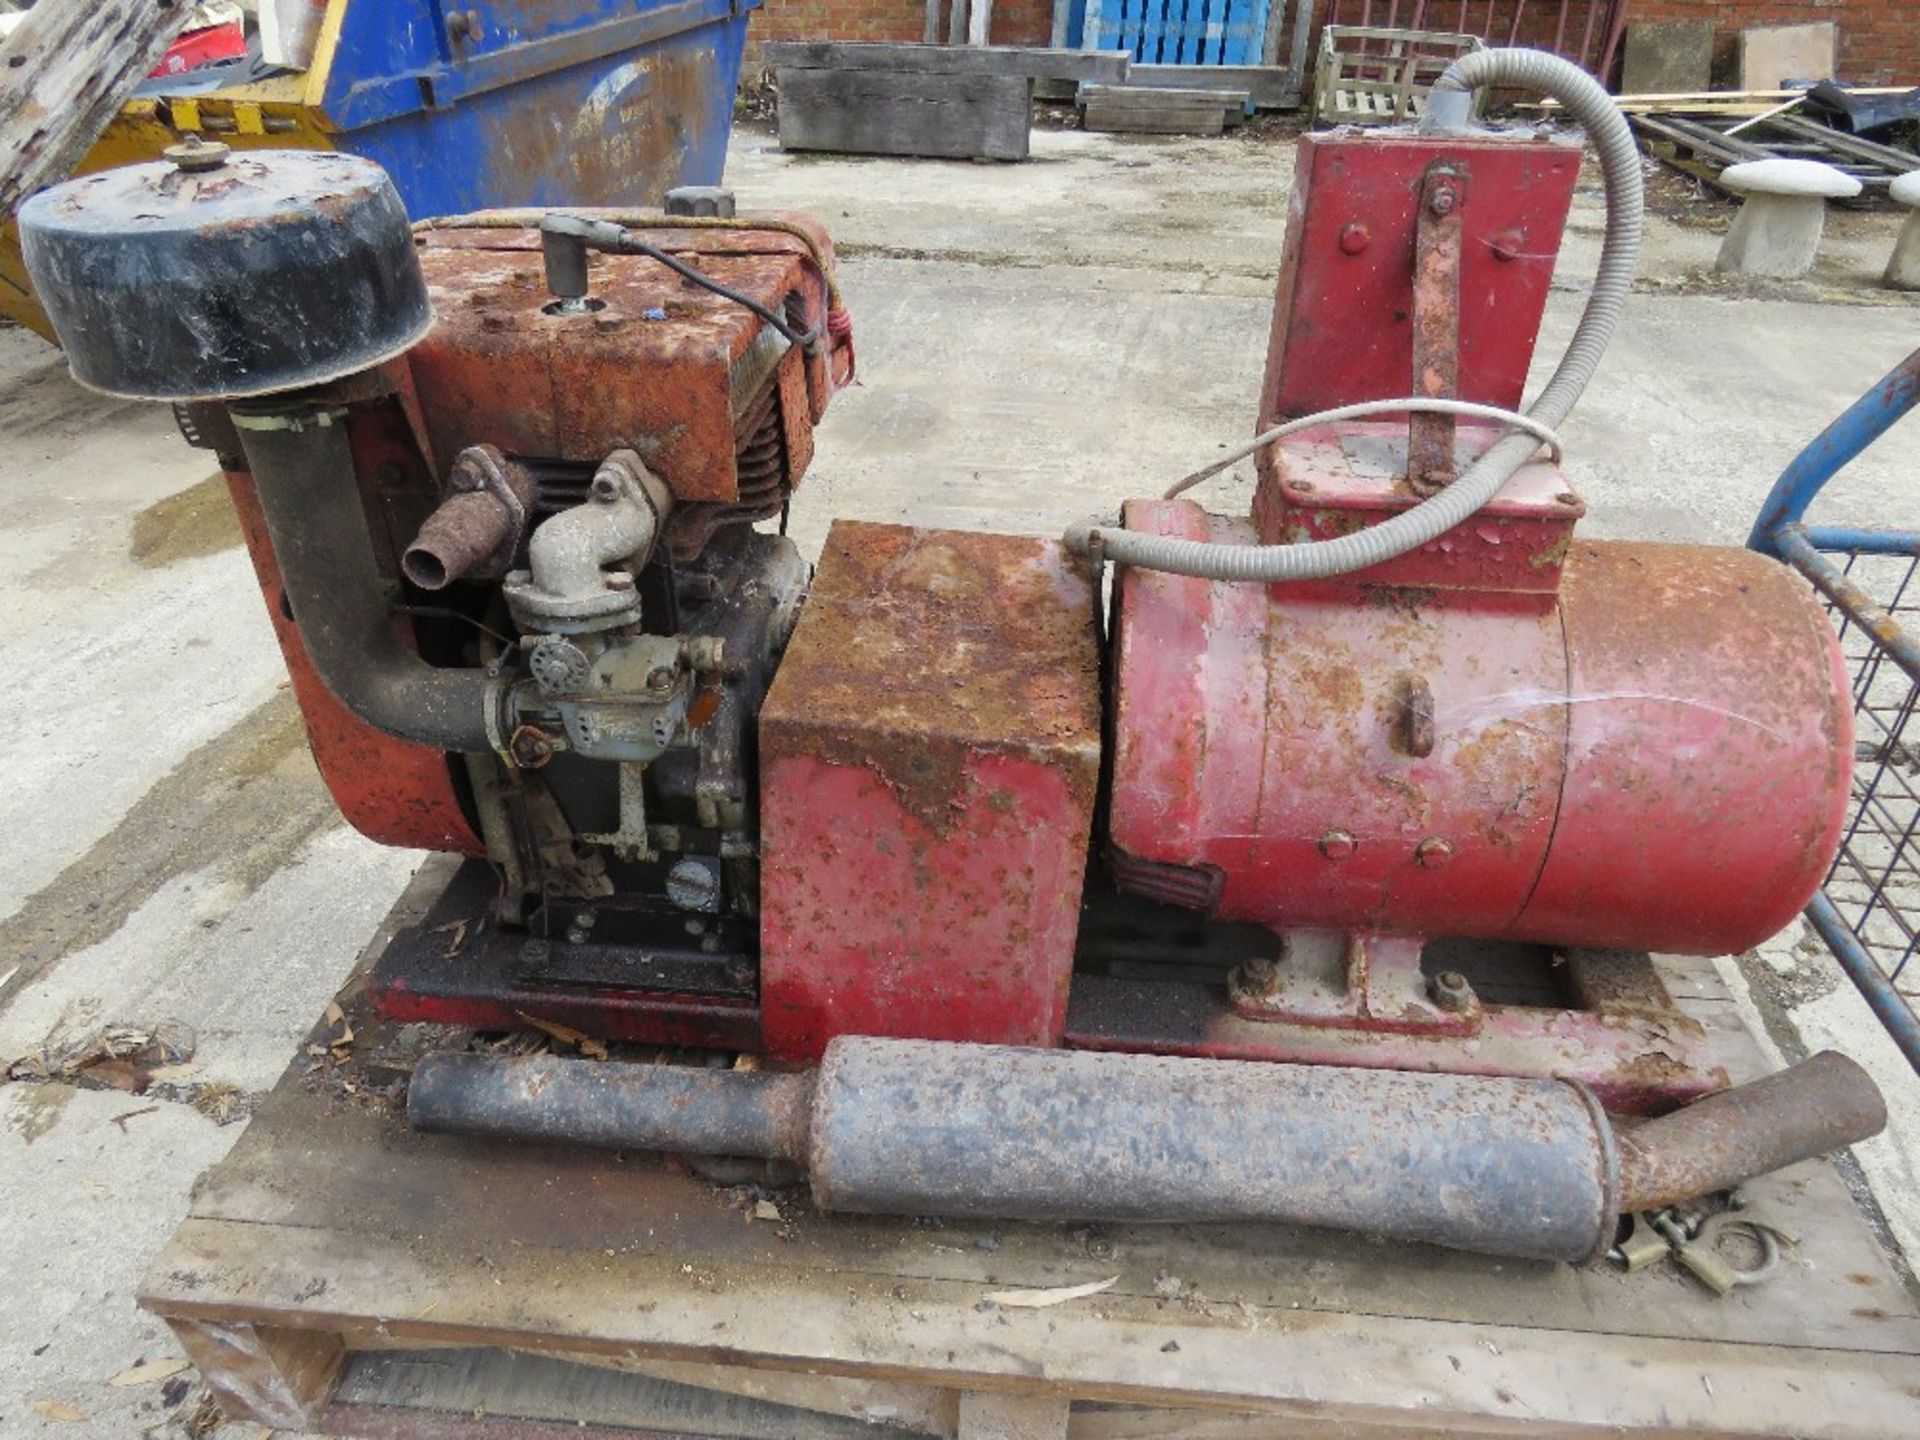 A Villiers stationary engine generator. Mounted on a trolley.